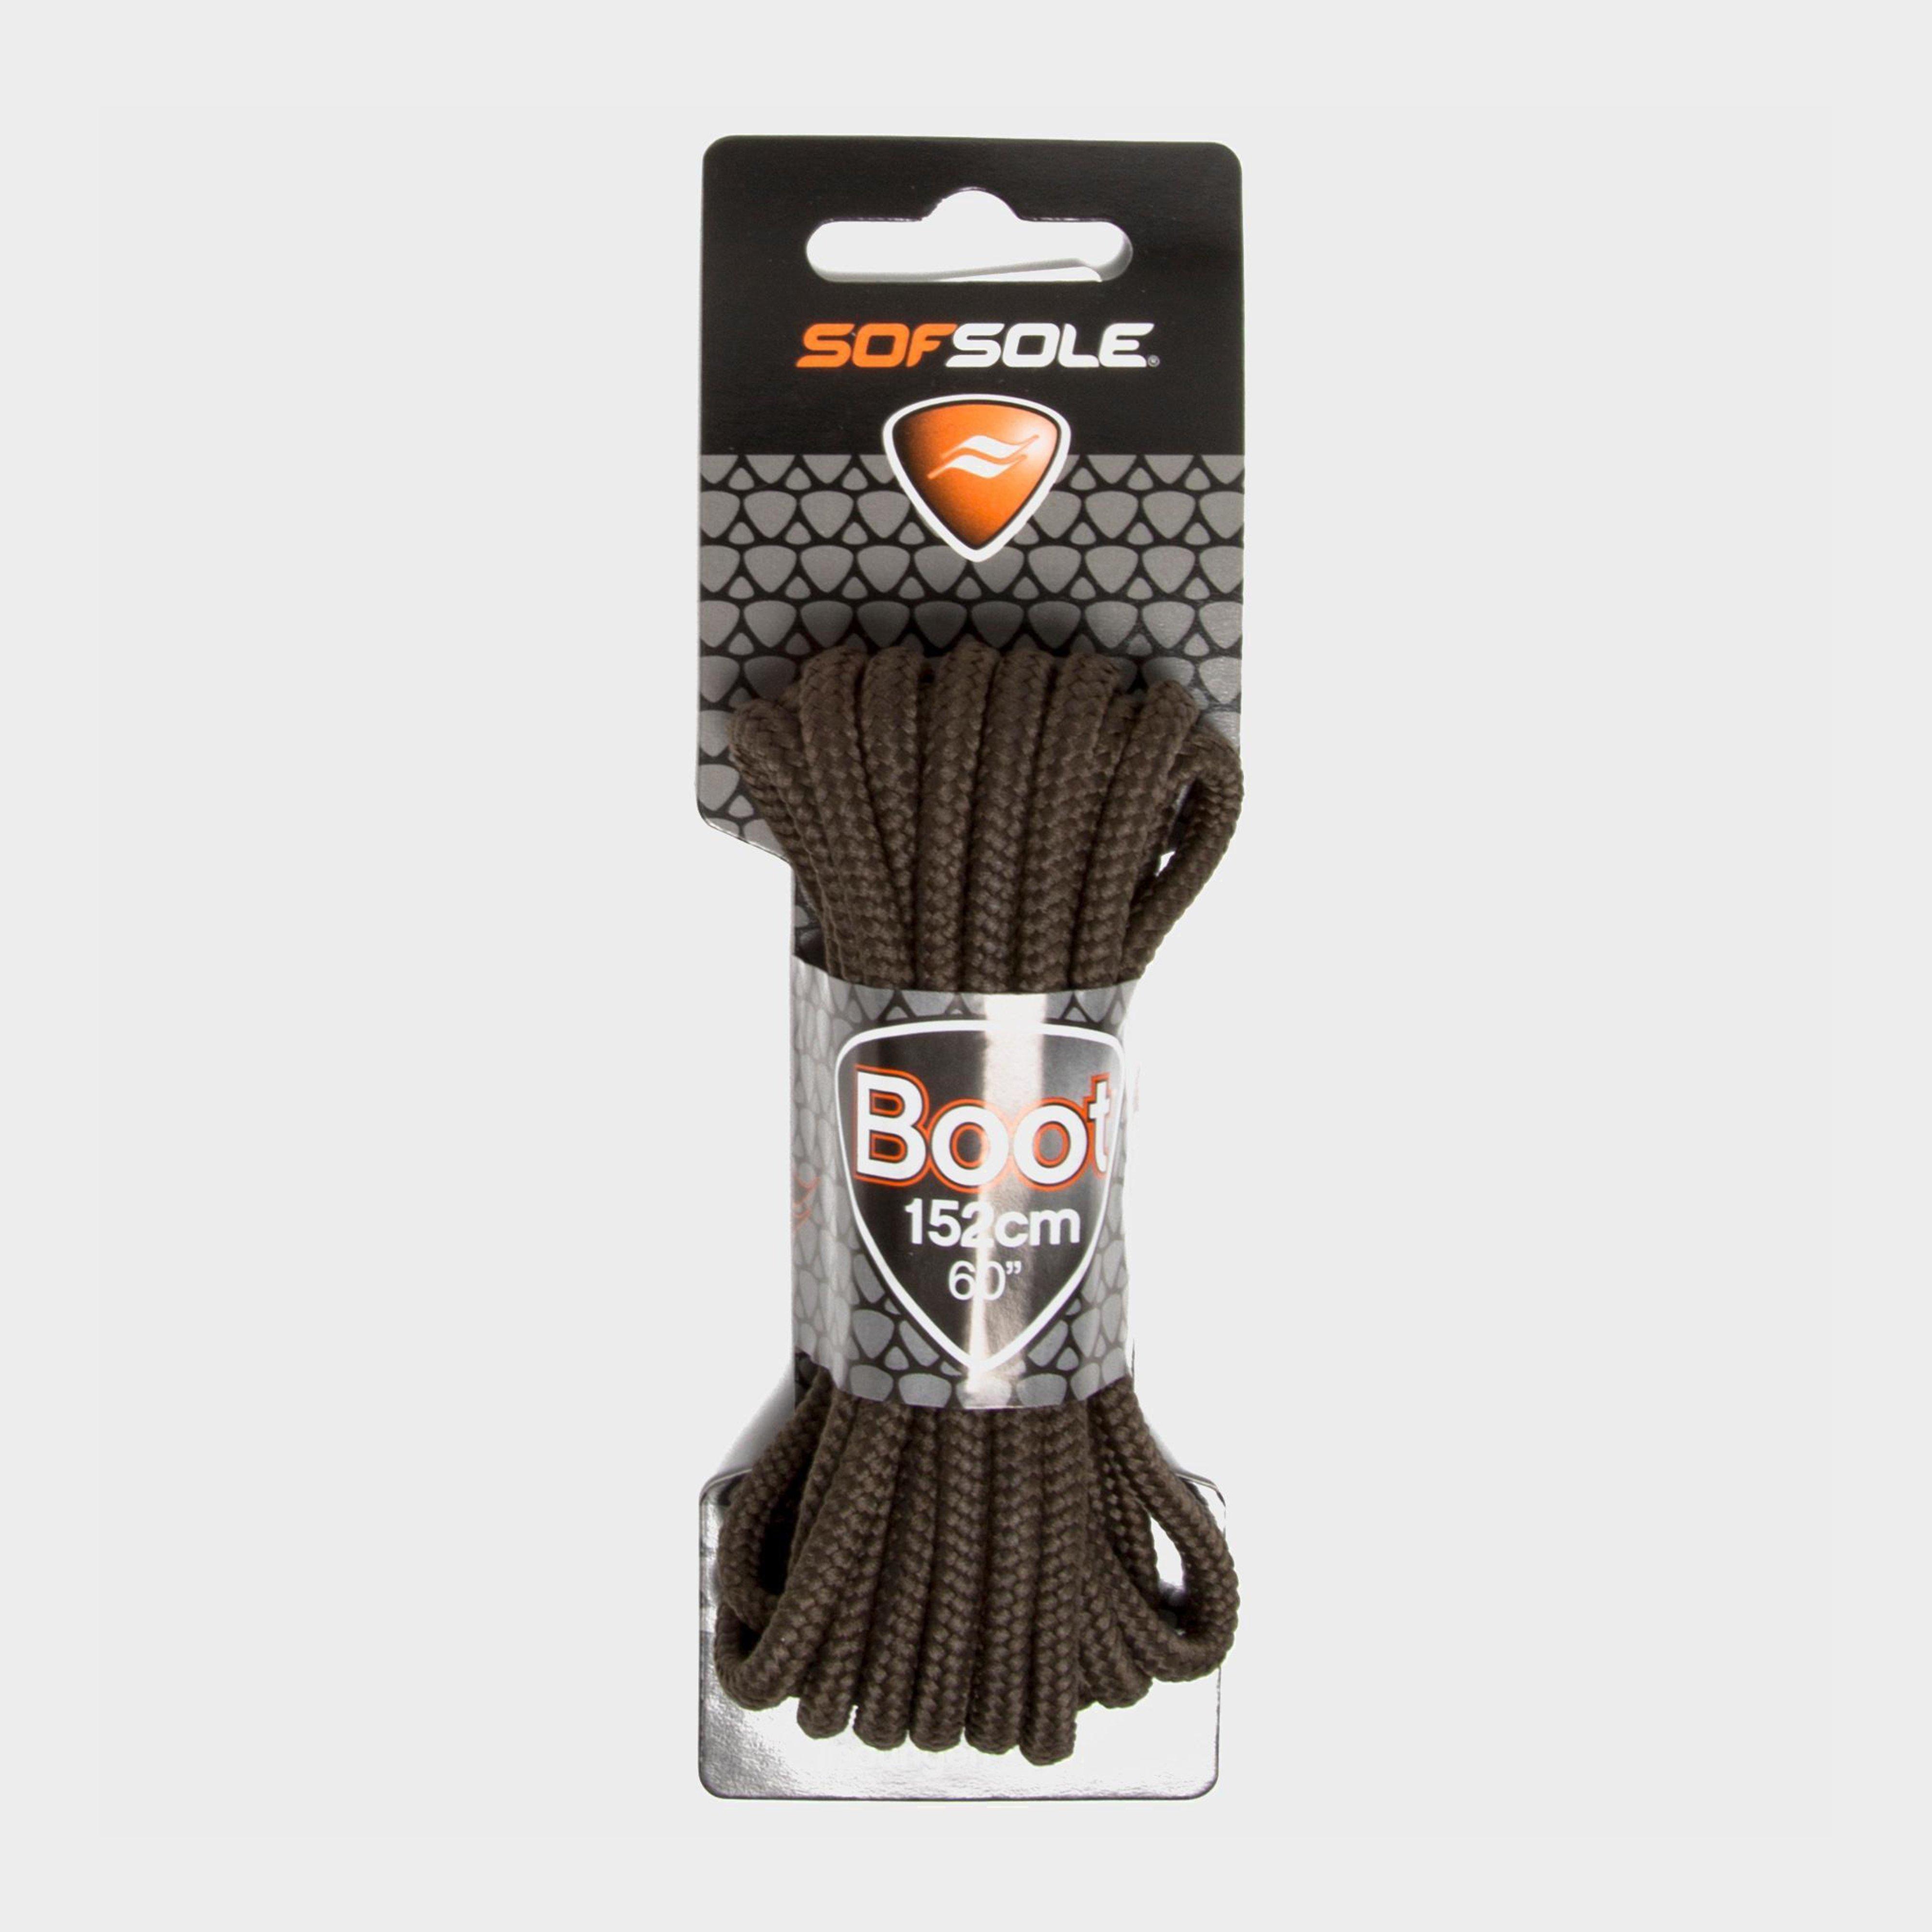 Sof Sole Wax Boot Laces - 152cm - Brown/dbn  Brown/dbn